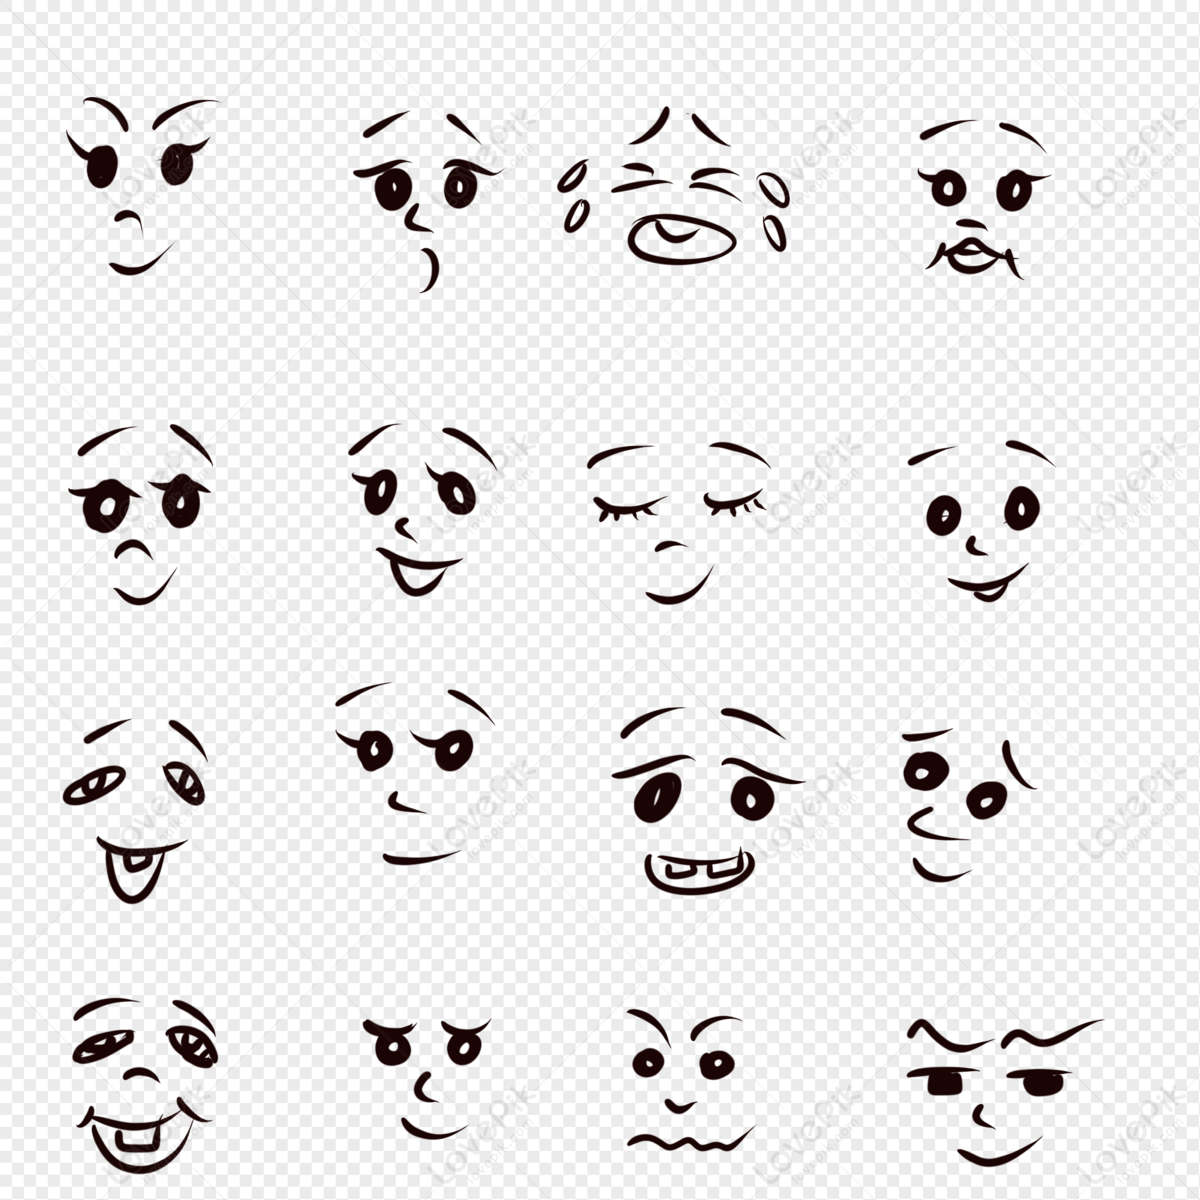 Expressions PNG Transparent Images Free Download